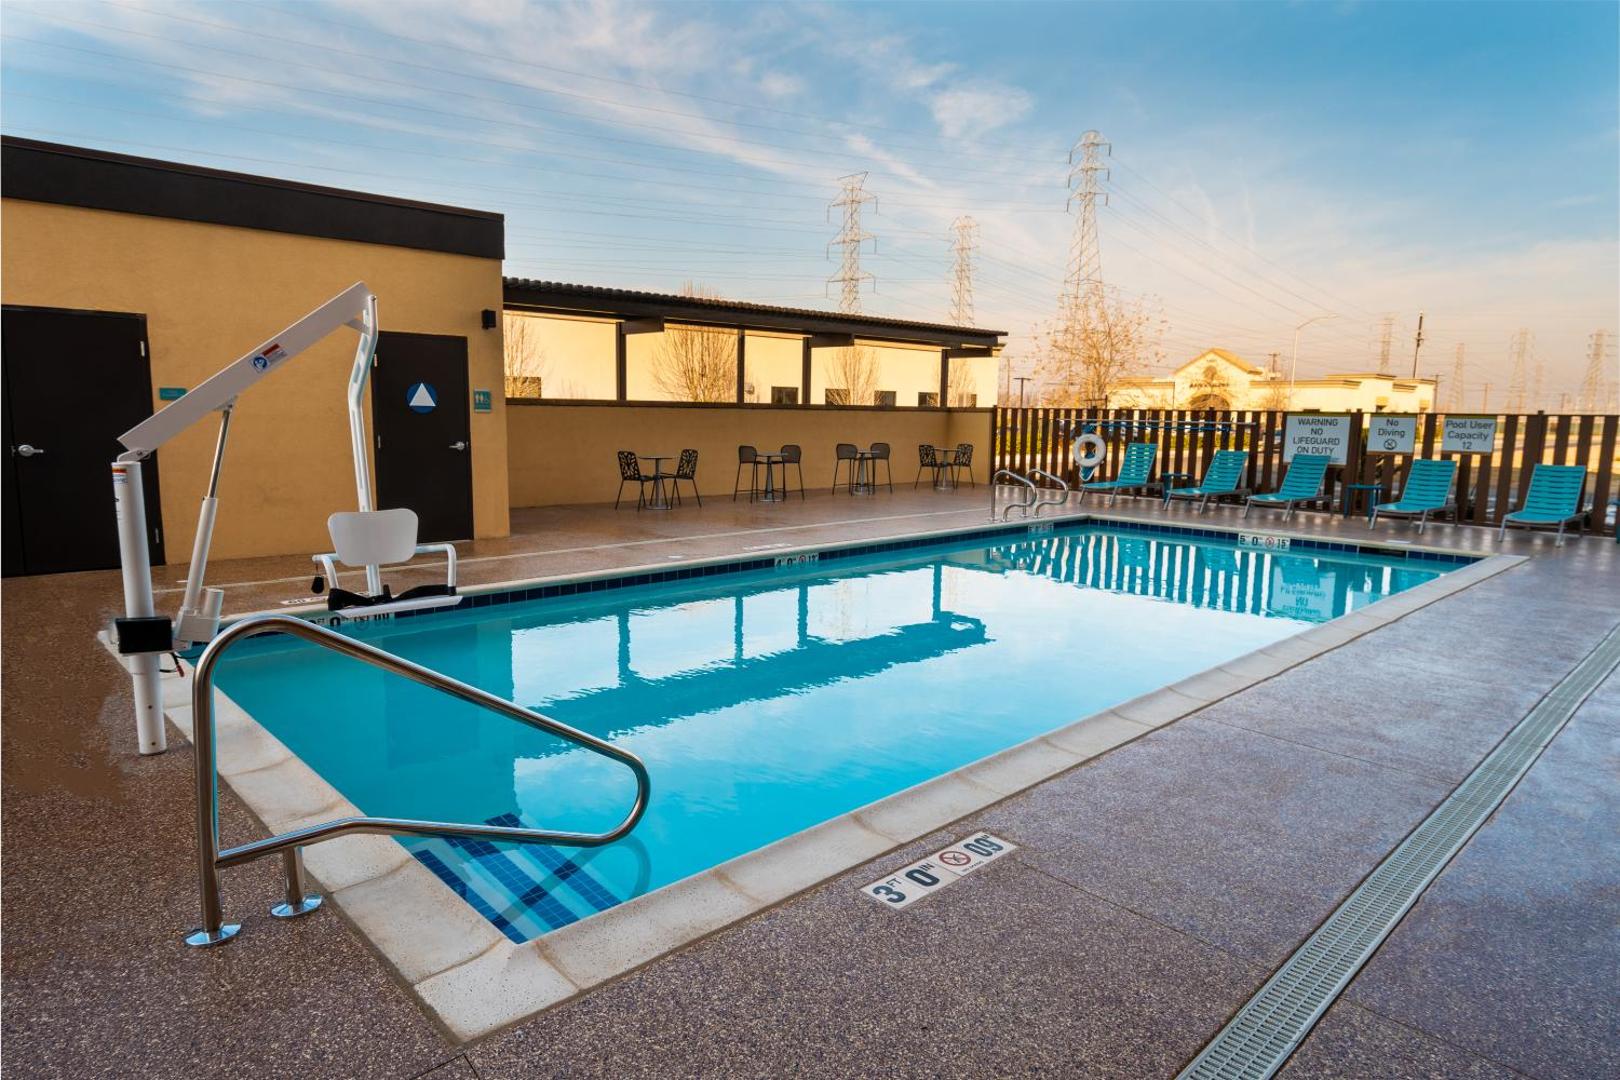 Home2 Suites by Hilton Bakersfield